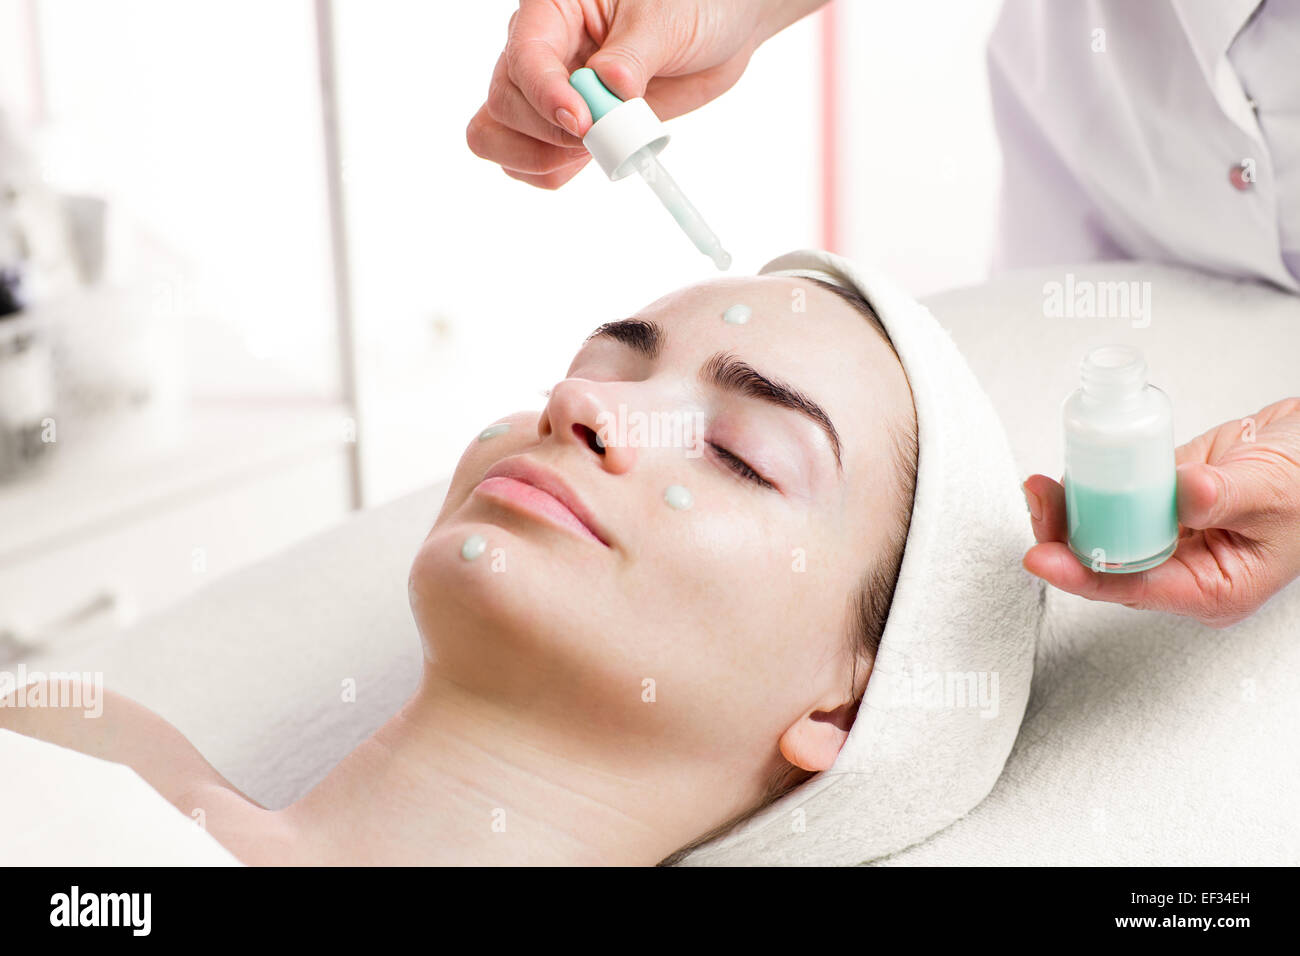 Serum facial treatment of young woman in spa salon Stock Photo